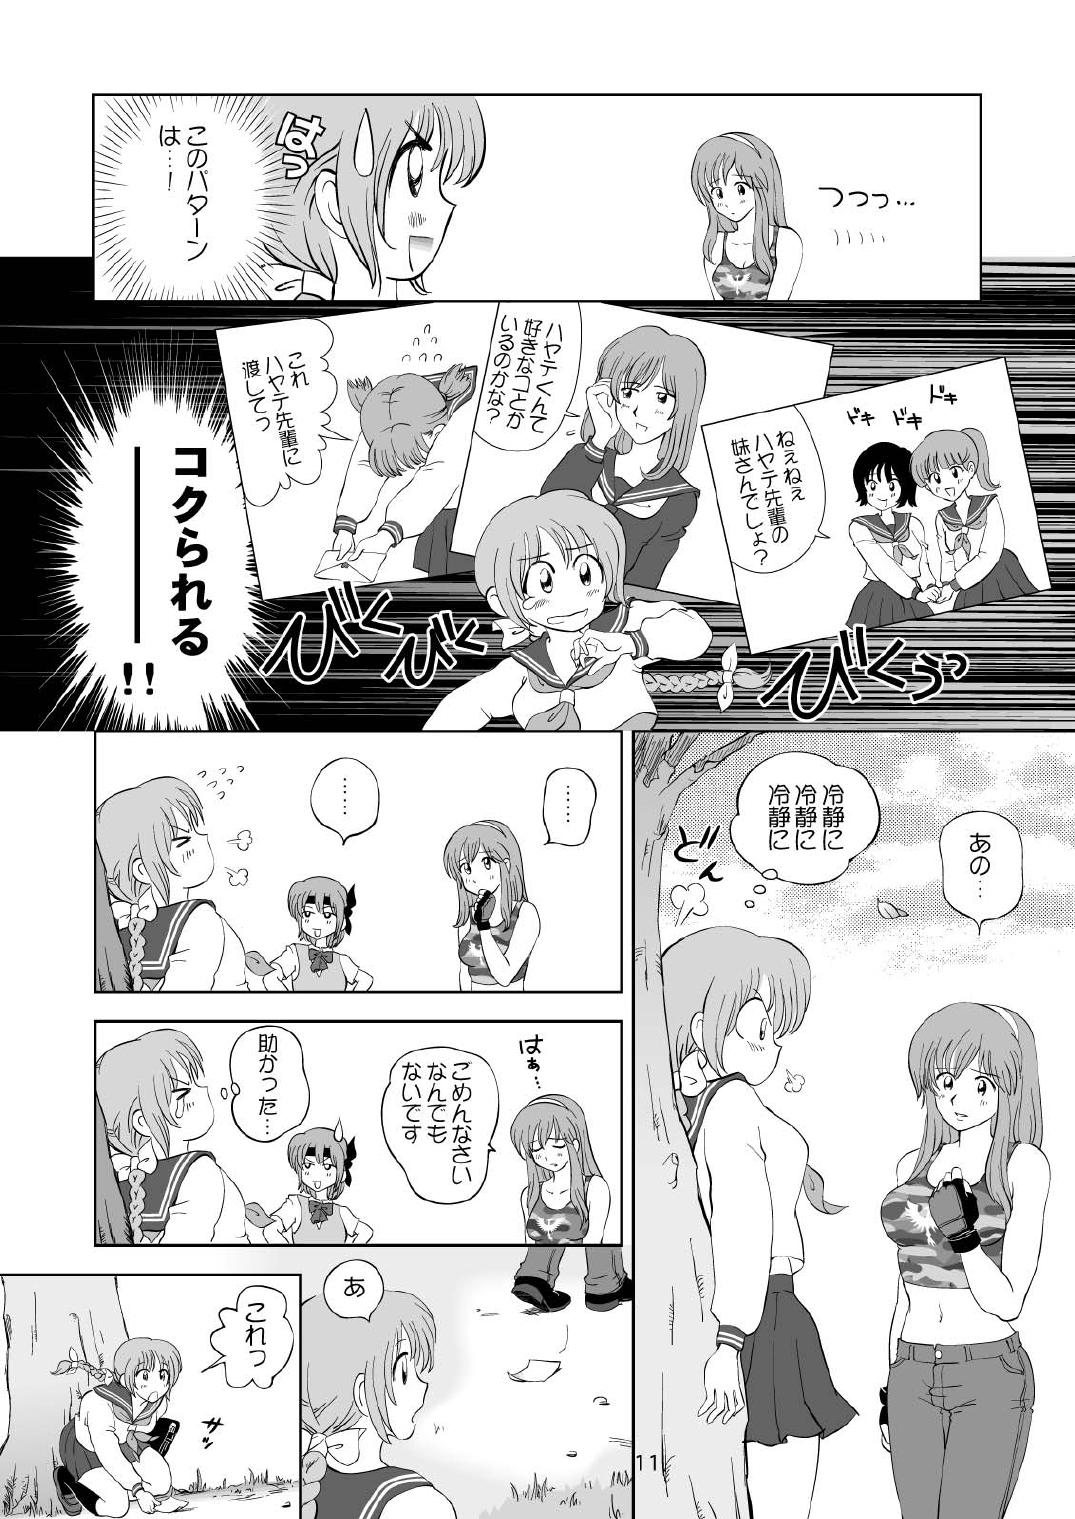 Nudity Sugoiyo!! Kasumi-chan 3 - Dead or alive Shemales - Page 11